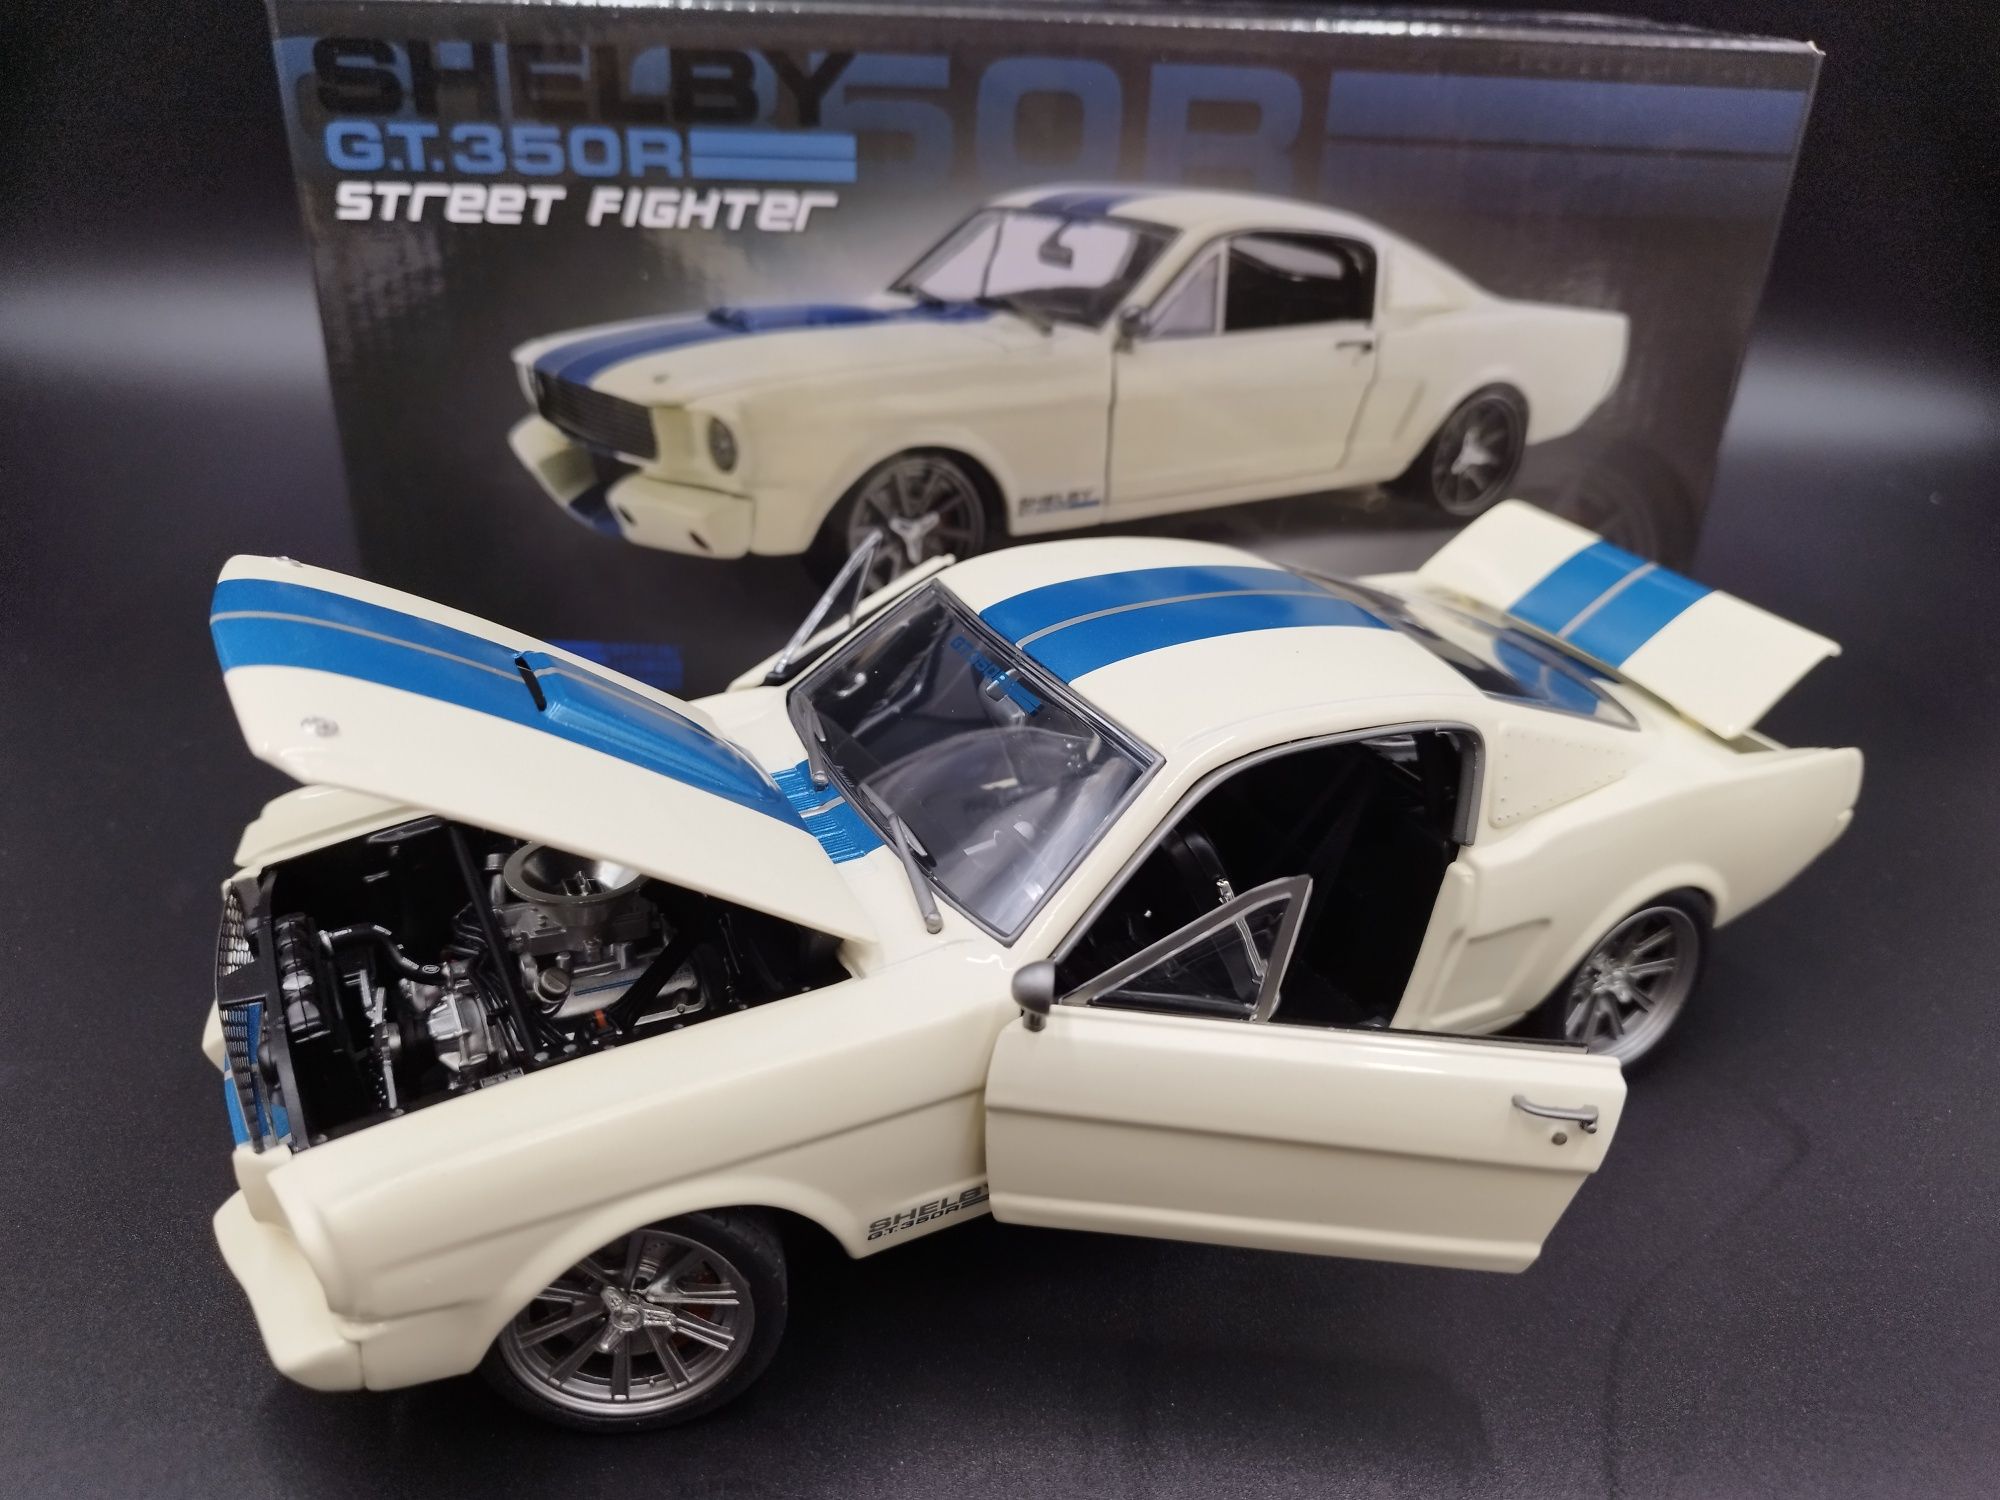 1:18 ACME Ford Mustang Shelby G.T 350R Street Fighter model